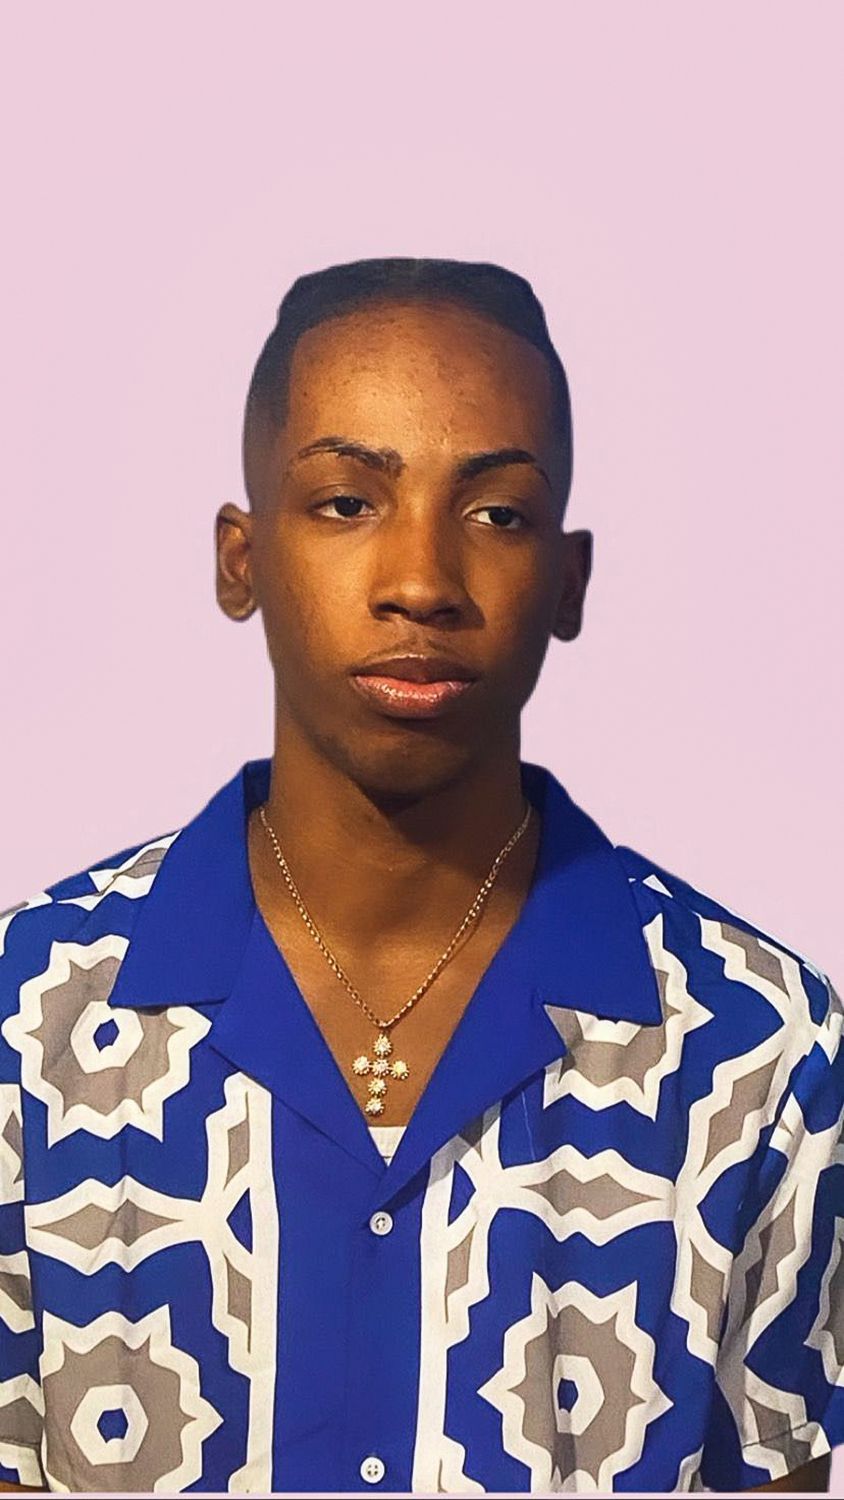 Zadane Russell stands for a portrait against a light purple background, wearing a blue, white and grey patterned shirt and a cross necklace.